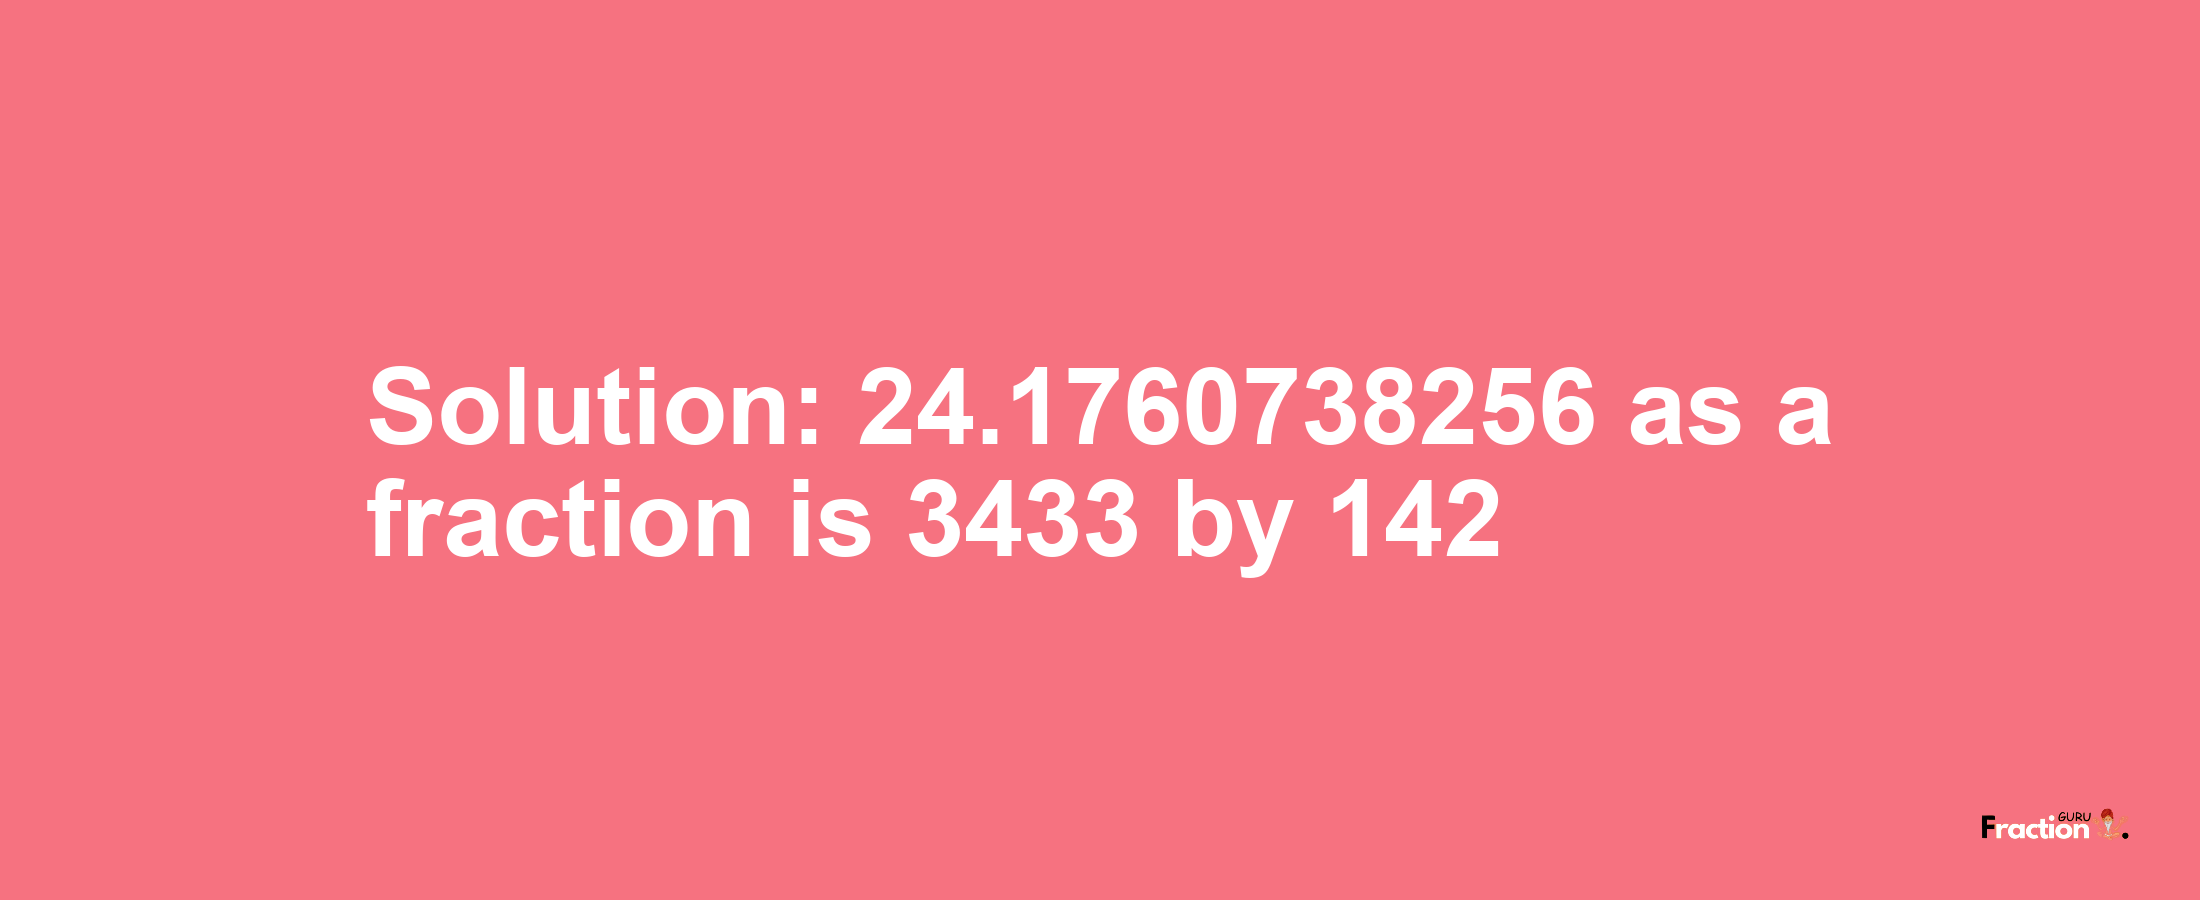 Solution:24.1760738256 as a fraction is 3433/142